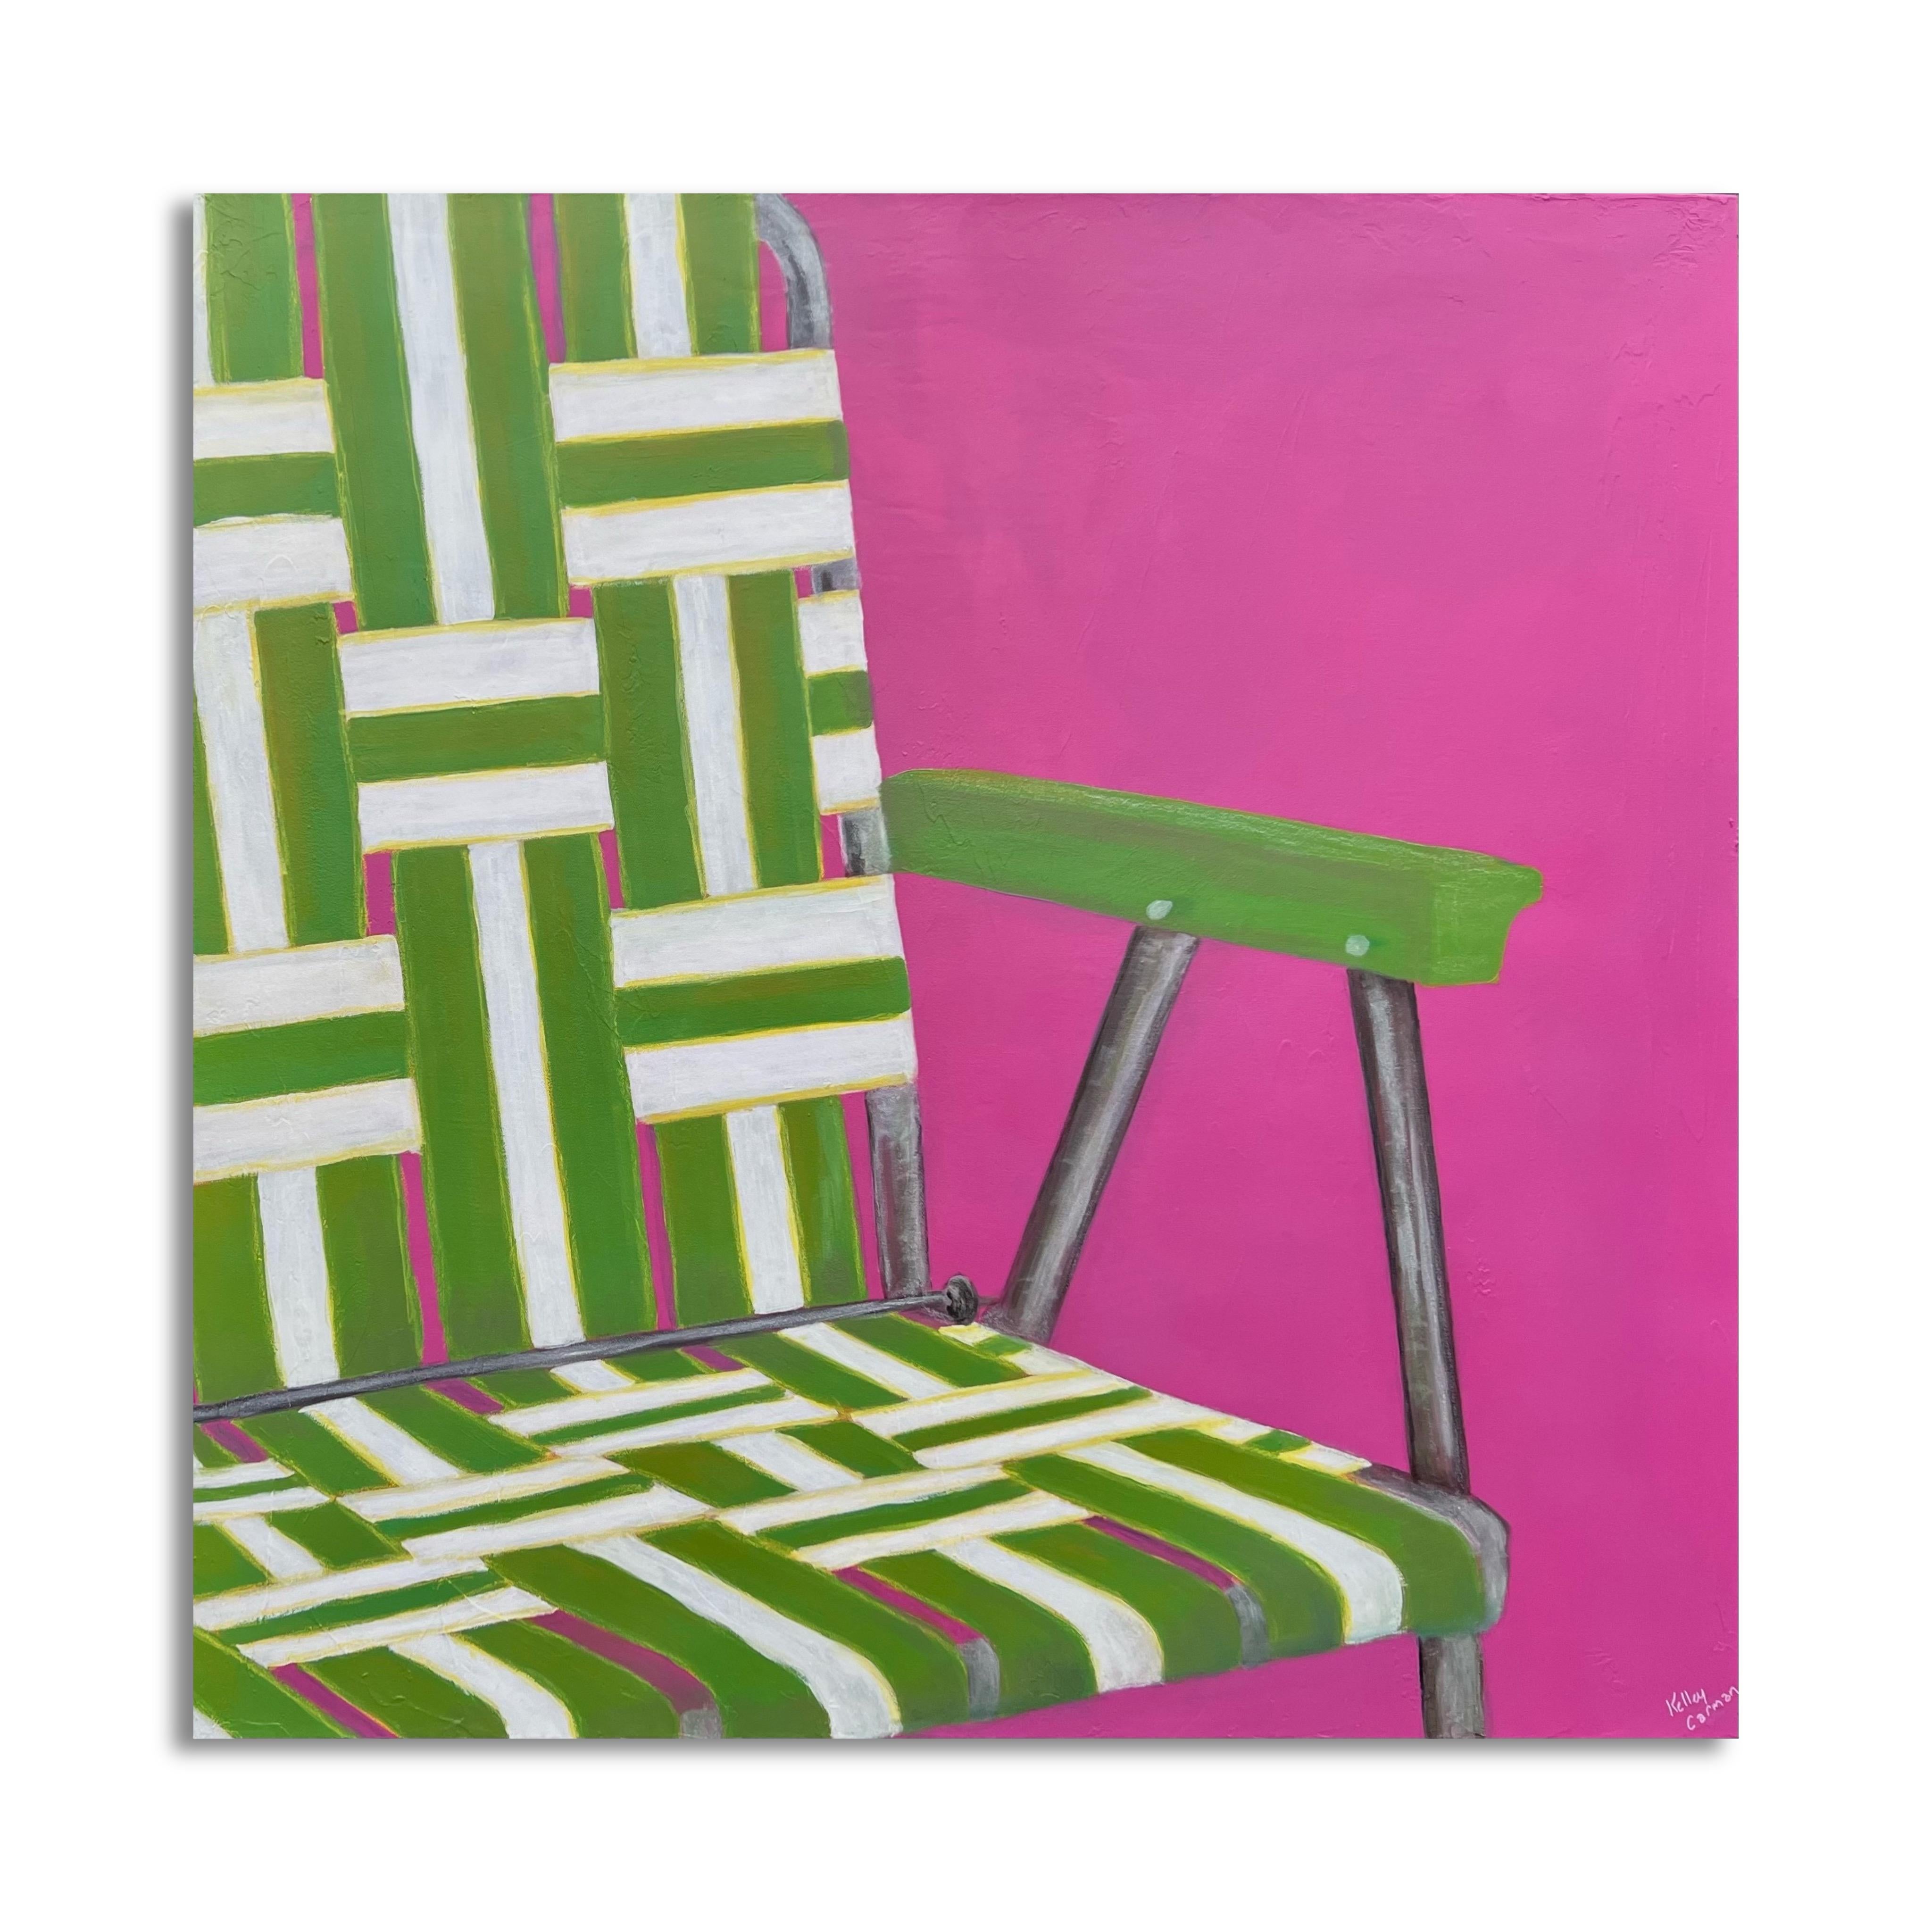 Lawn Chair Brigade (Figurative, Pattern, Mid-Century, Modern, Pink, Green) - Painting by Kelley Carman